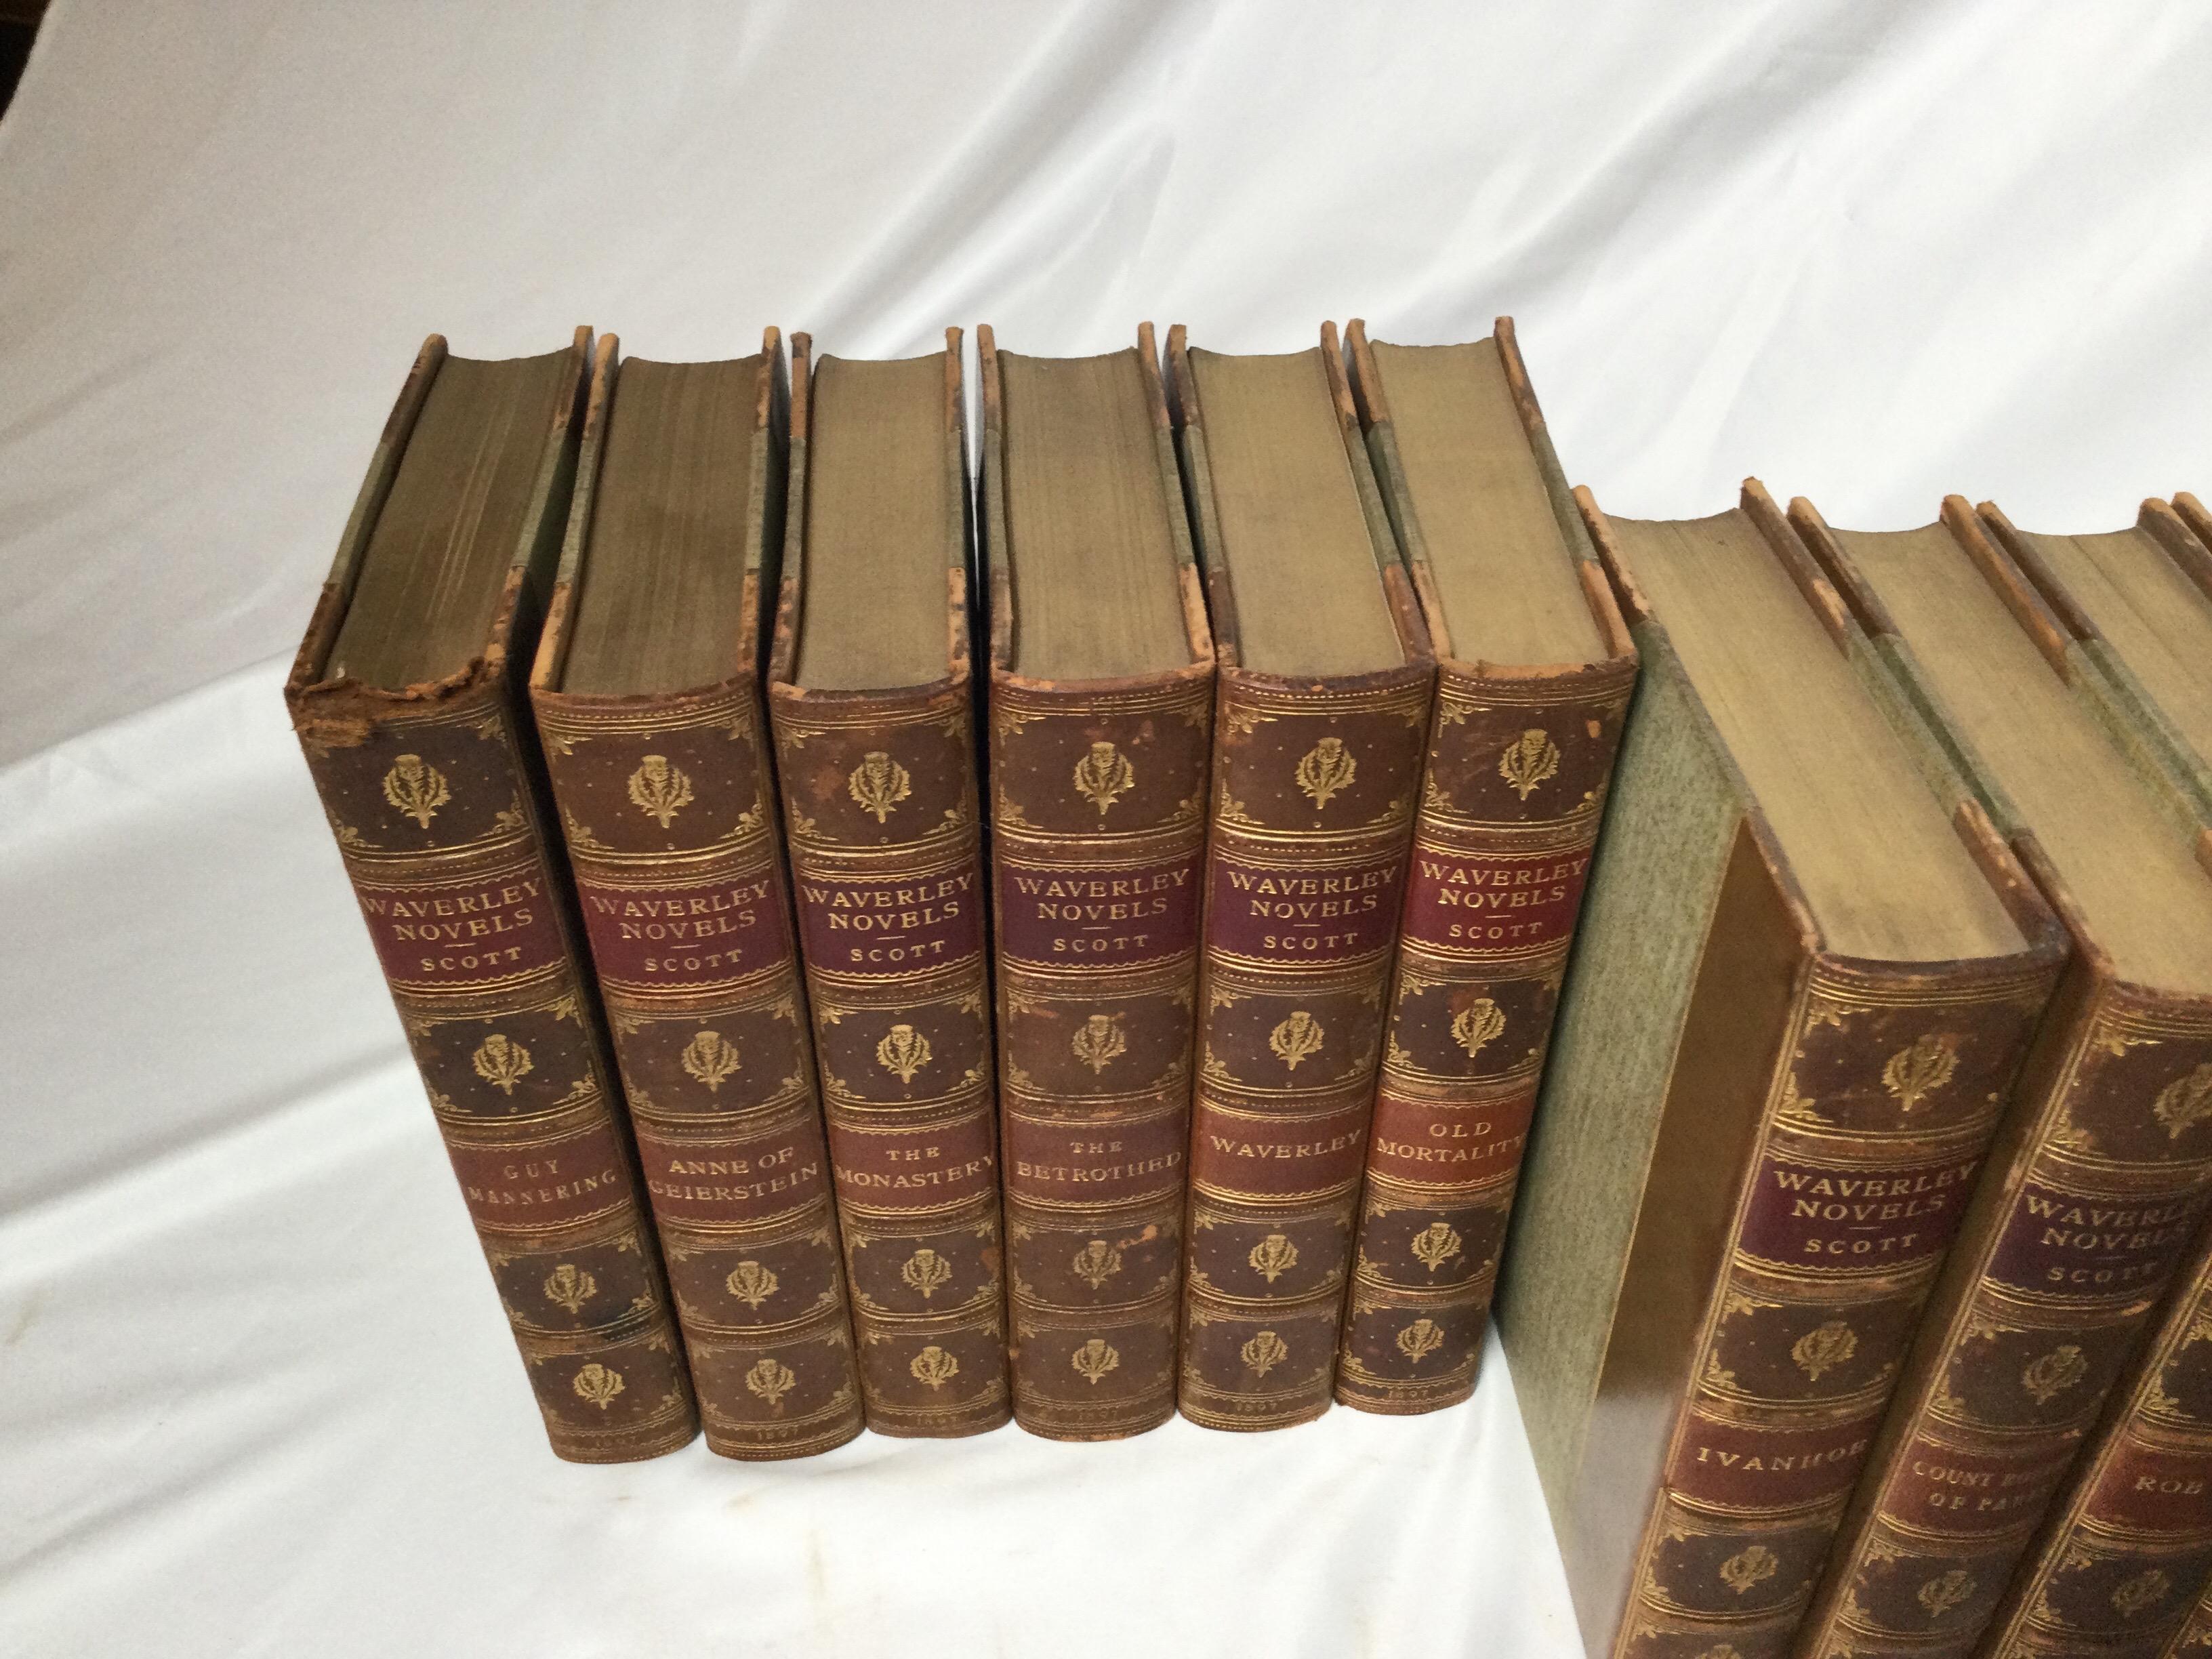 Set of 22 leather bound books, The Waverly Novels by Sir Walter Scott.
Published in London, Adam & Charles Black, circa 1897.
Great for a collector or someone finishing a library.
Dimensions: 8